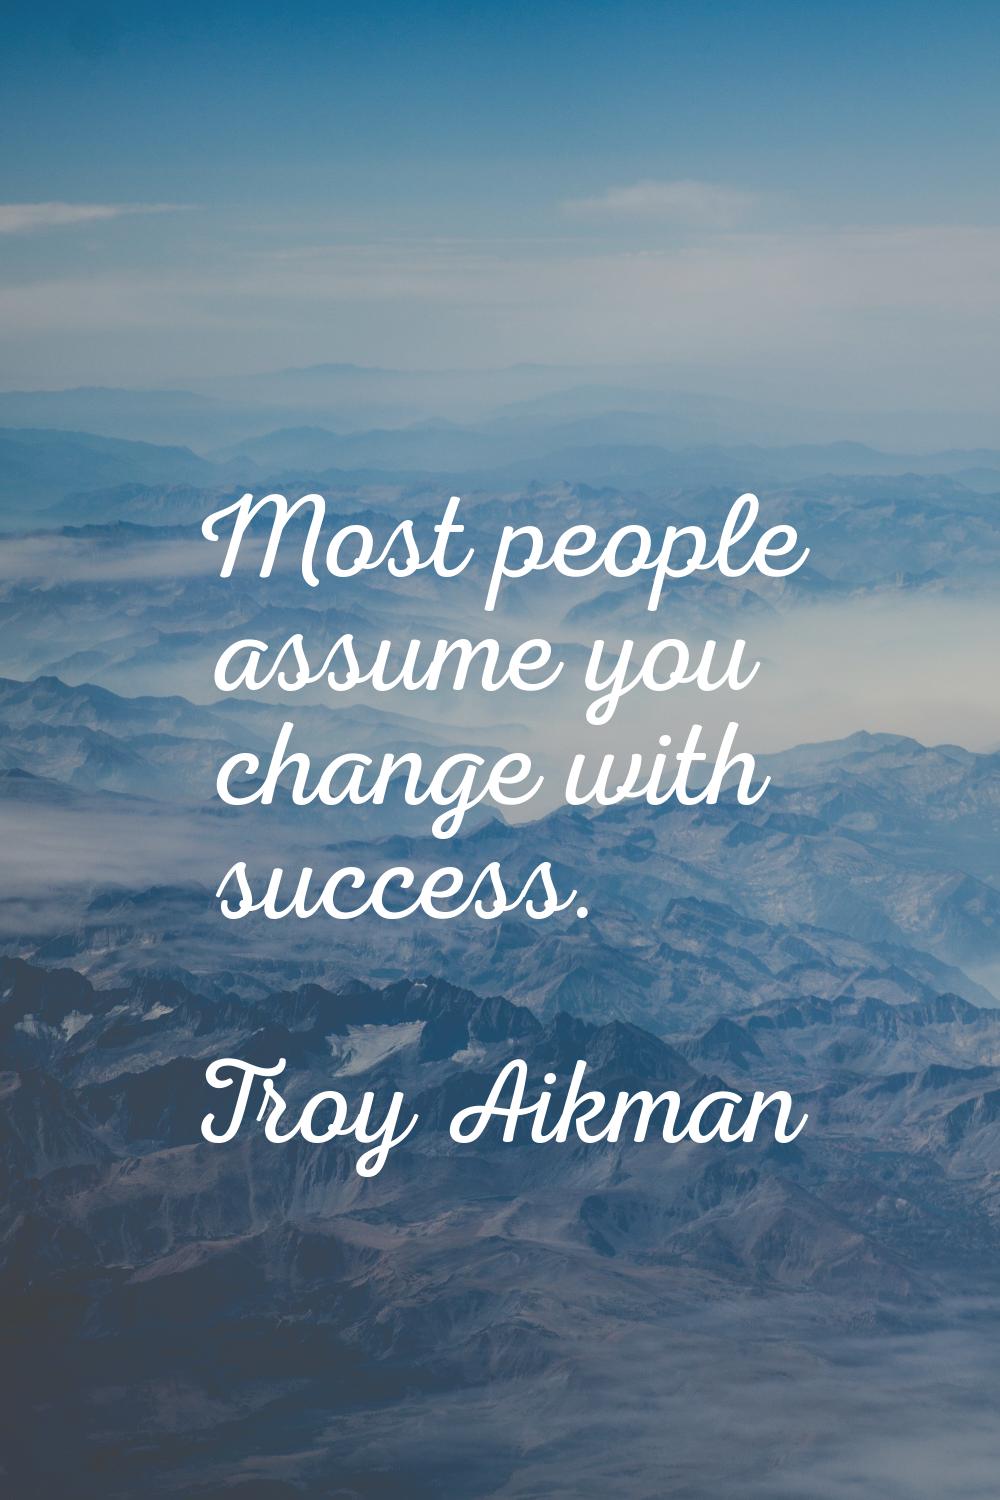 Most people assume you change with success.